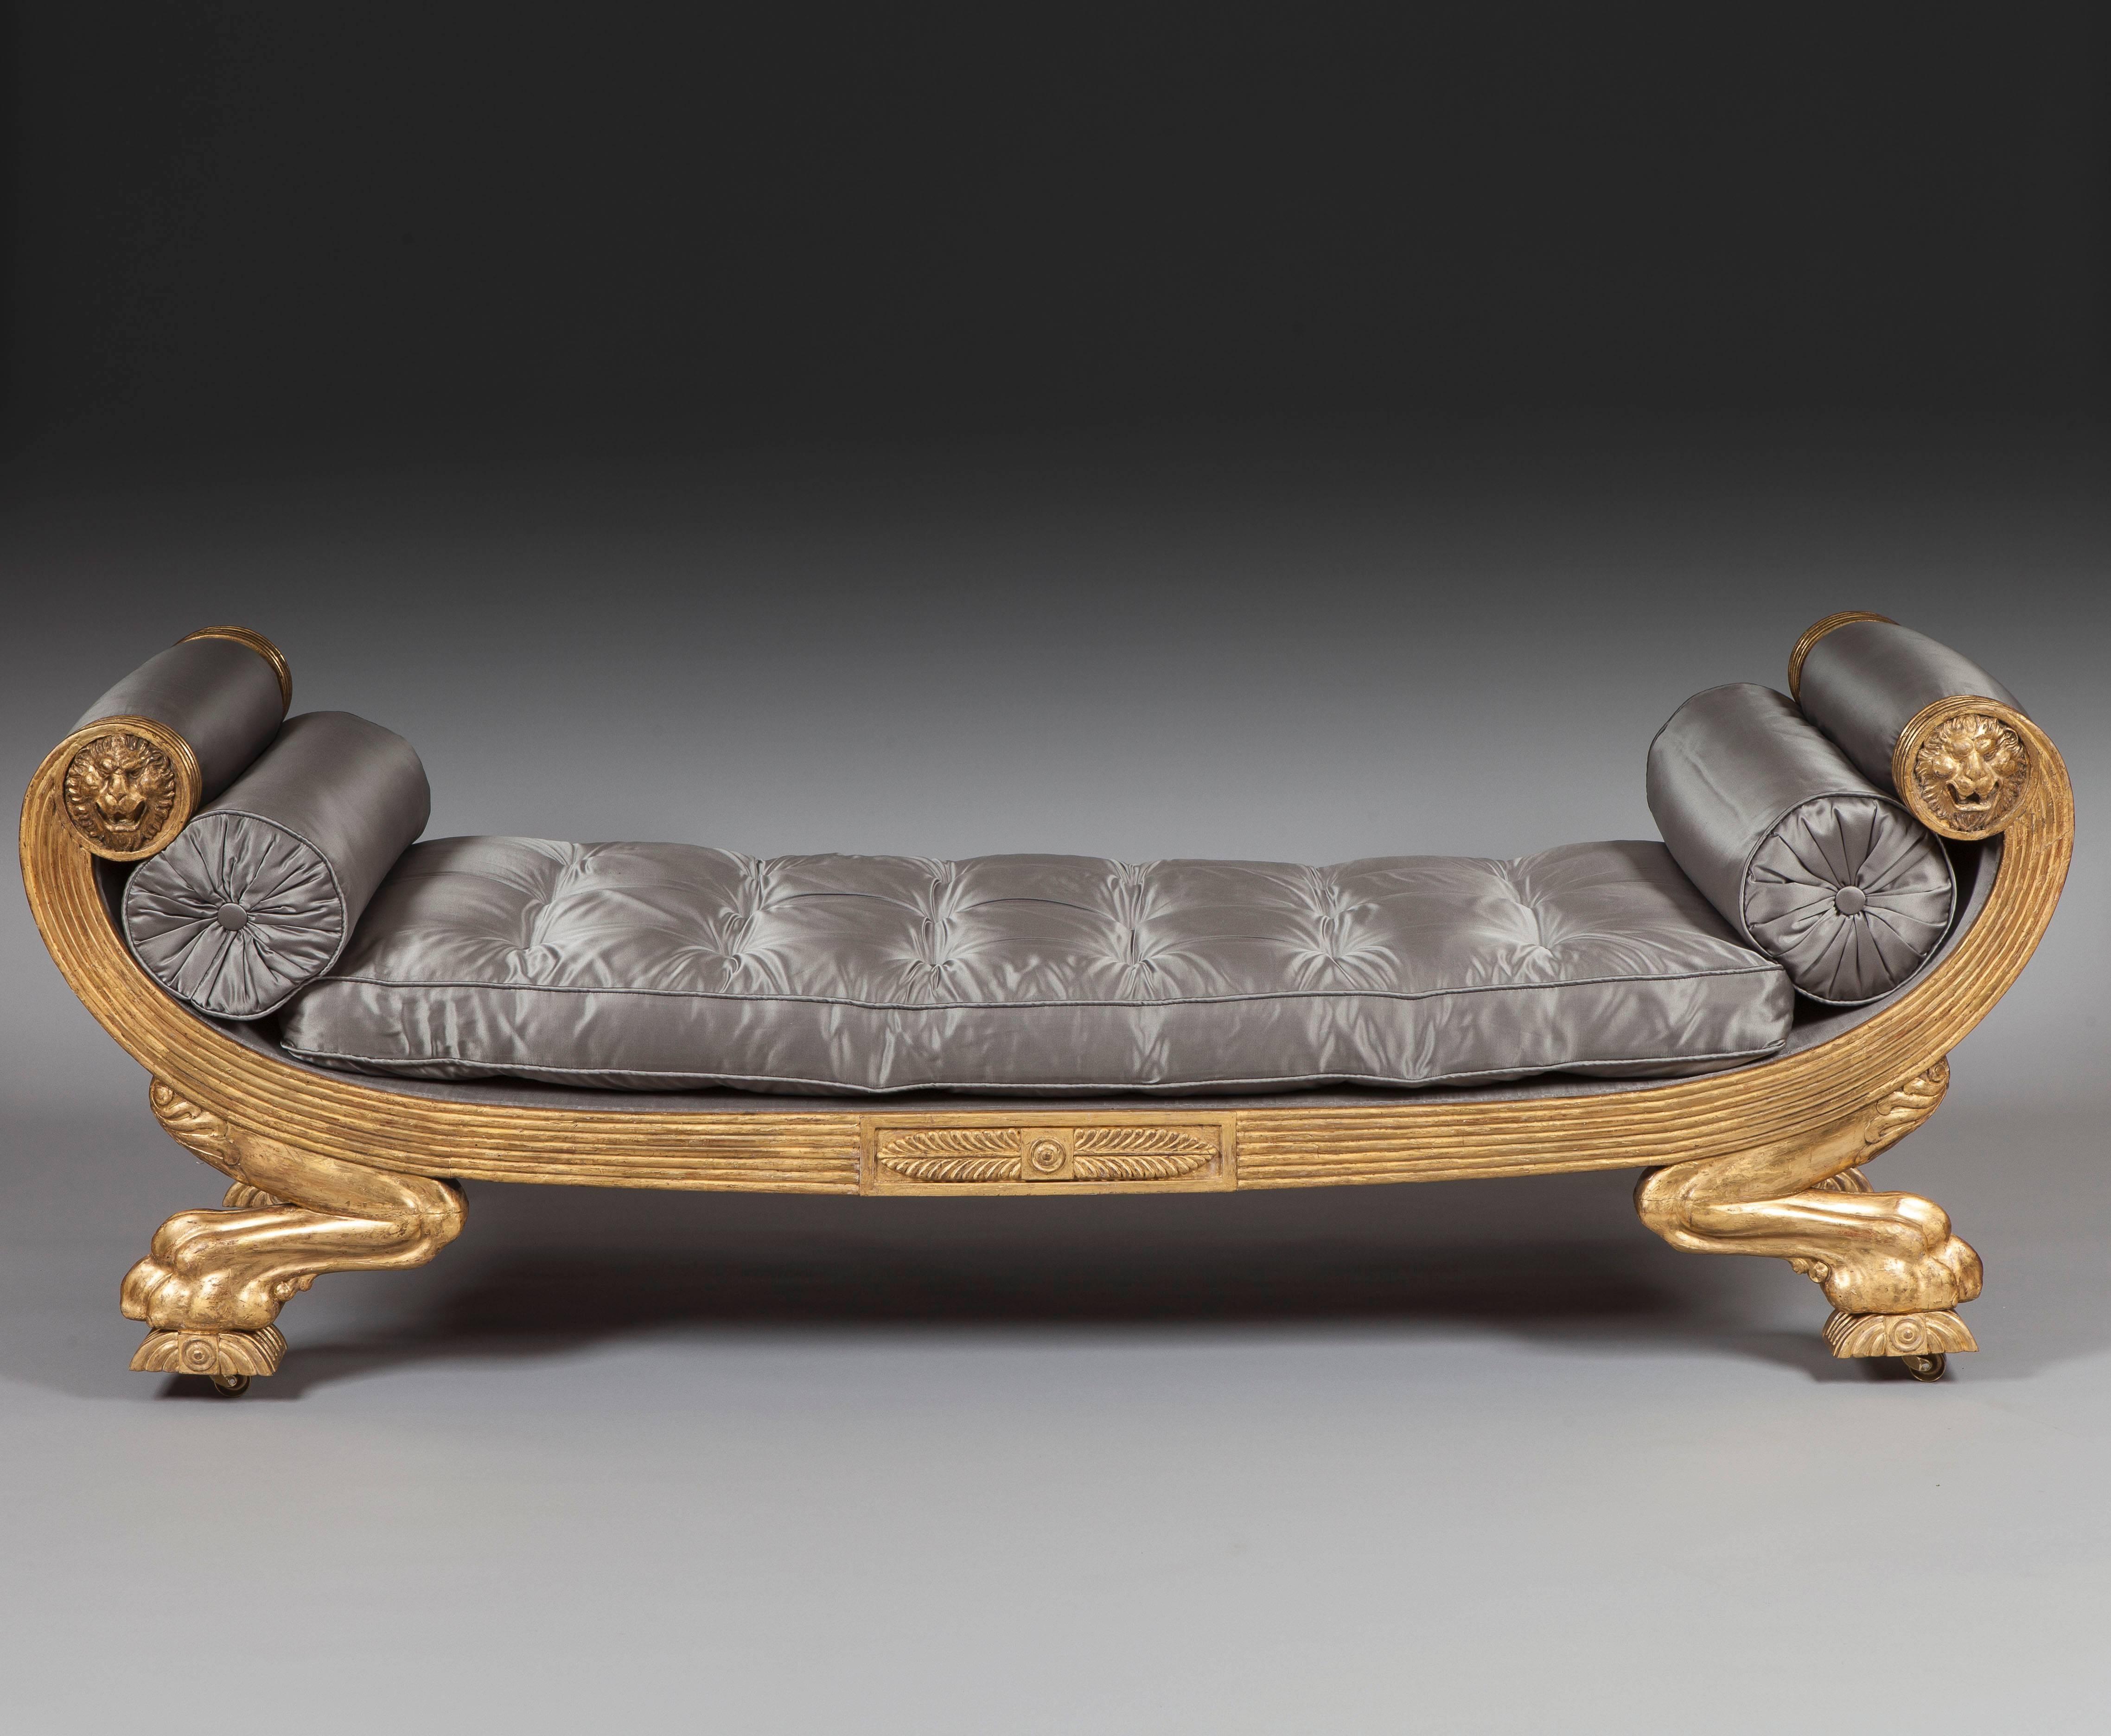 Of freestanding form, constructed in giltwood; rising from caster shod addorsed anthemion decorated legs of leonine design, terminating in paw feet, the channeled frame having rectangular tablets to each side with palmettes, the swept ends being